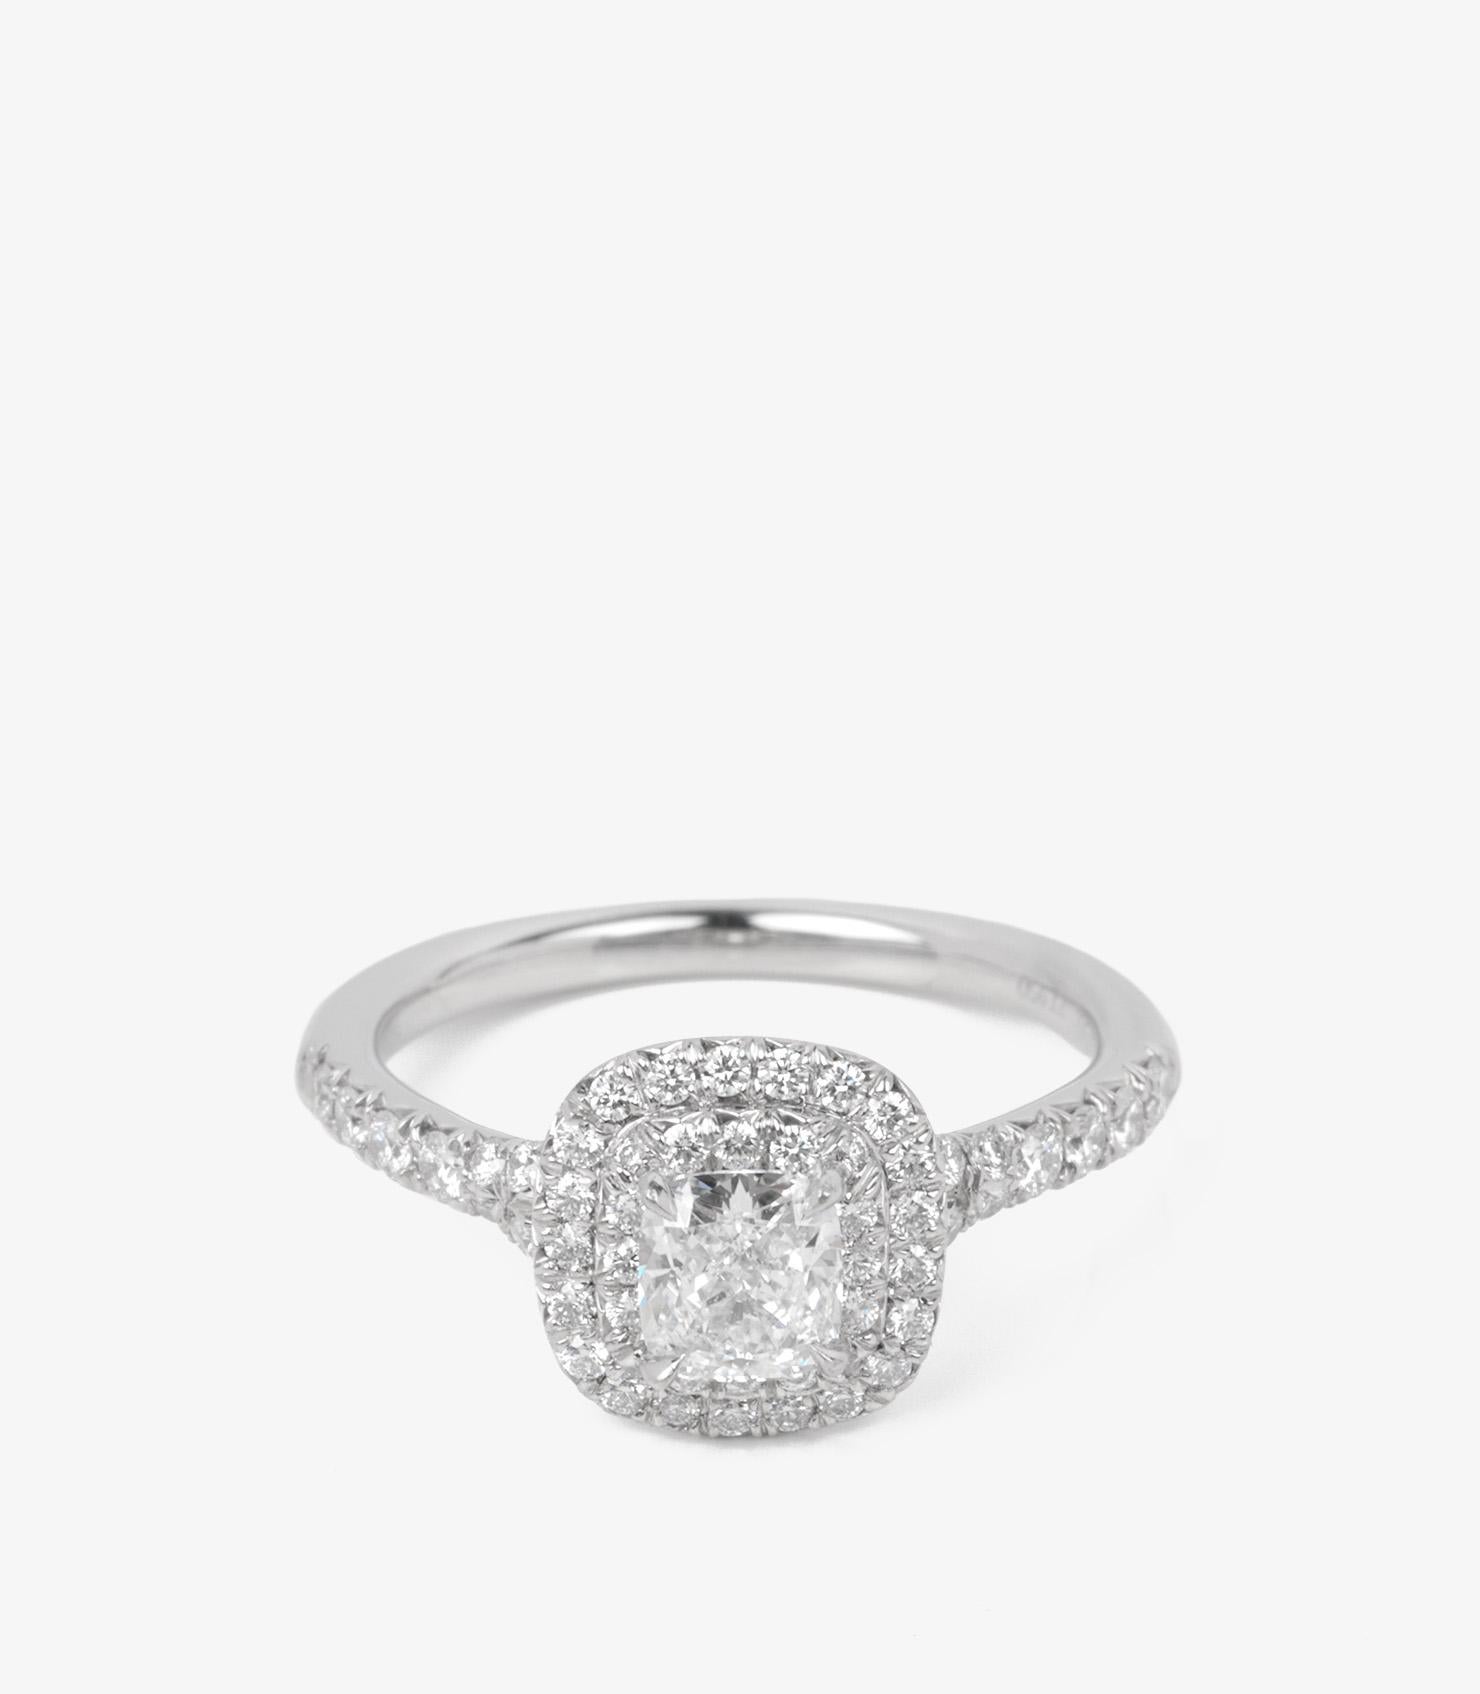 Tiffany & Co. 0.45ct Cushion Cut Diamond Platinum Soleste Ring In Excellent Condition For Sale In Bishop's Stortford, Hertfordshire